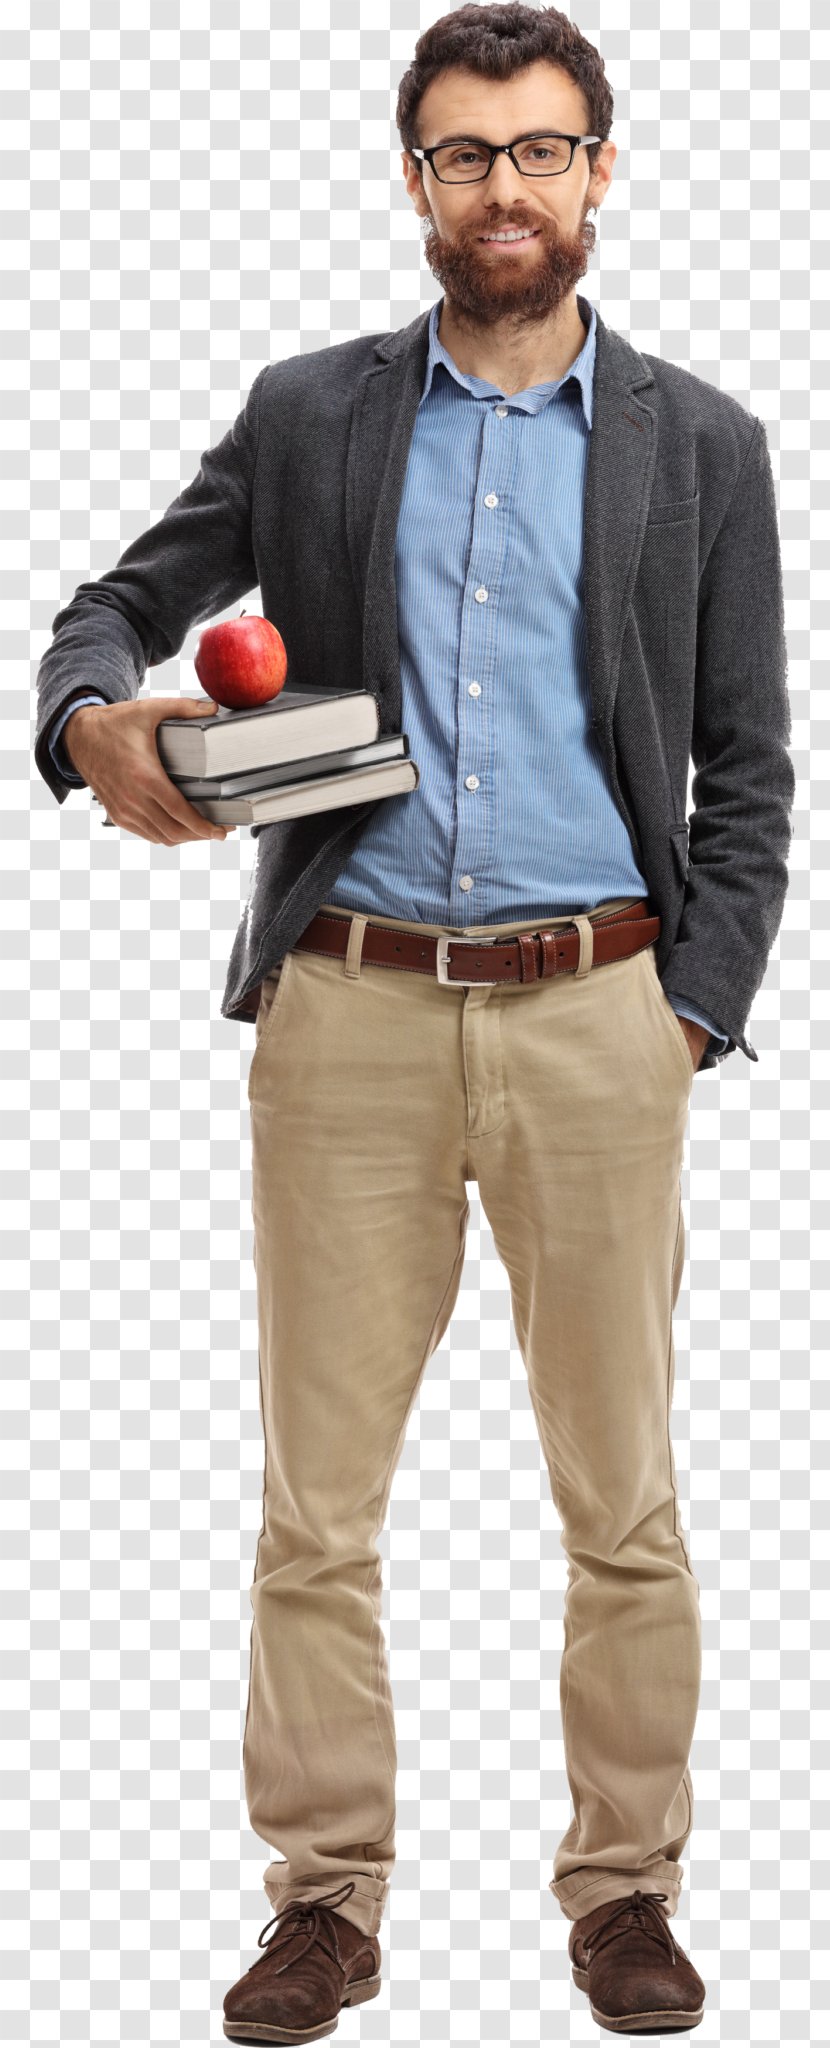 Stock Photography Image Royalty-free Video - Bald Male Elementary Teacher Transparent PNG